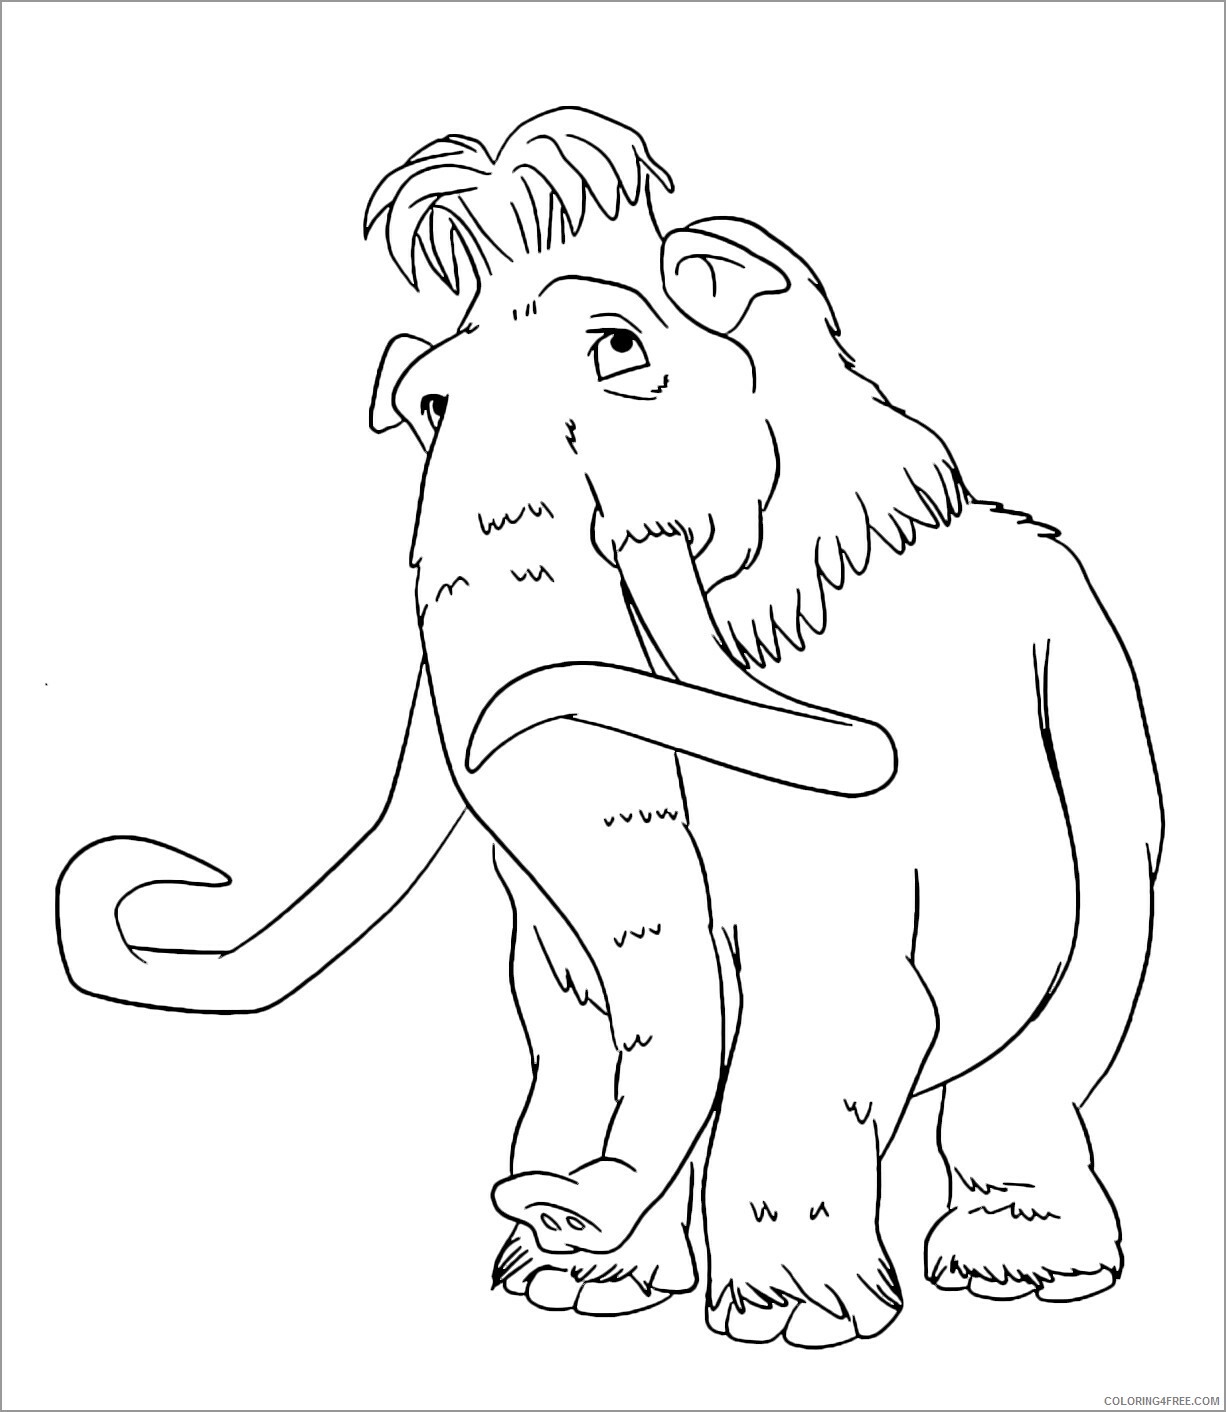 Mammoth Coloring Pages Animal Printable Sheets cartoon mammoth 2021 3266 Coloring4free